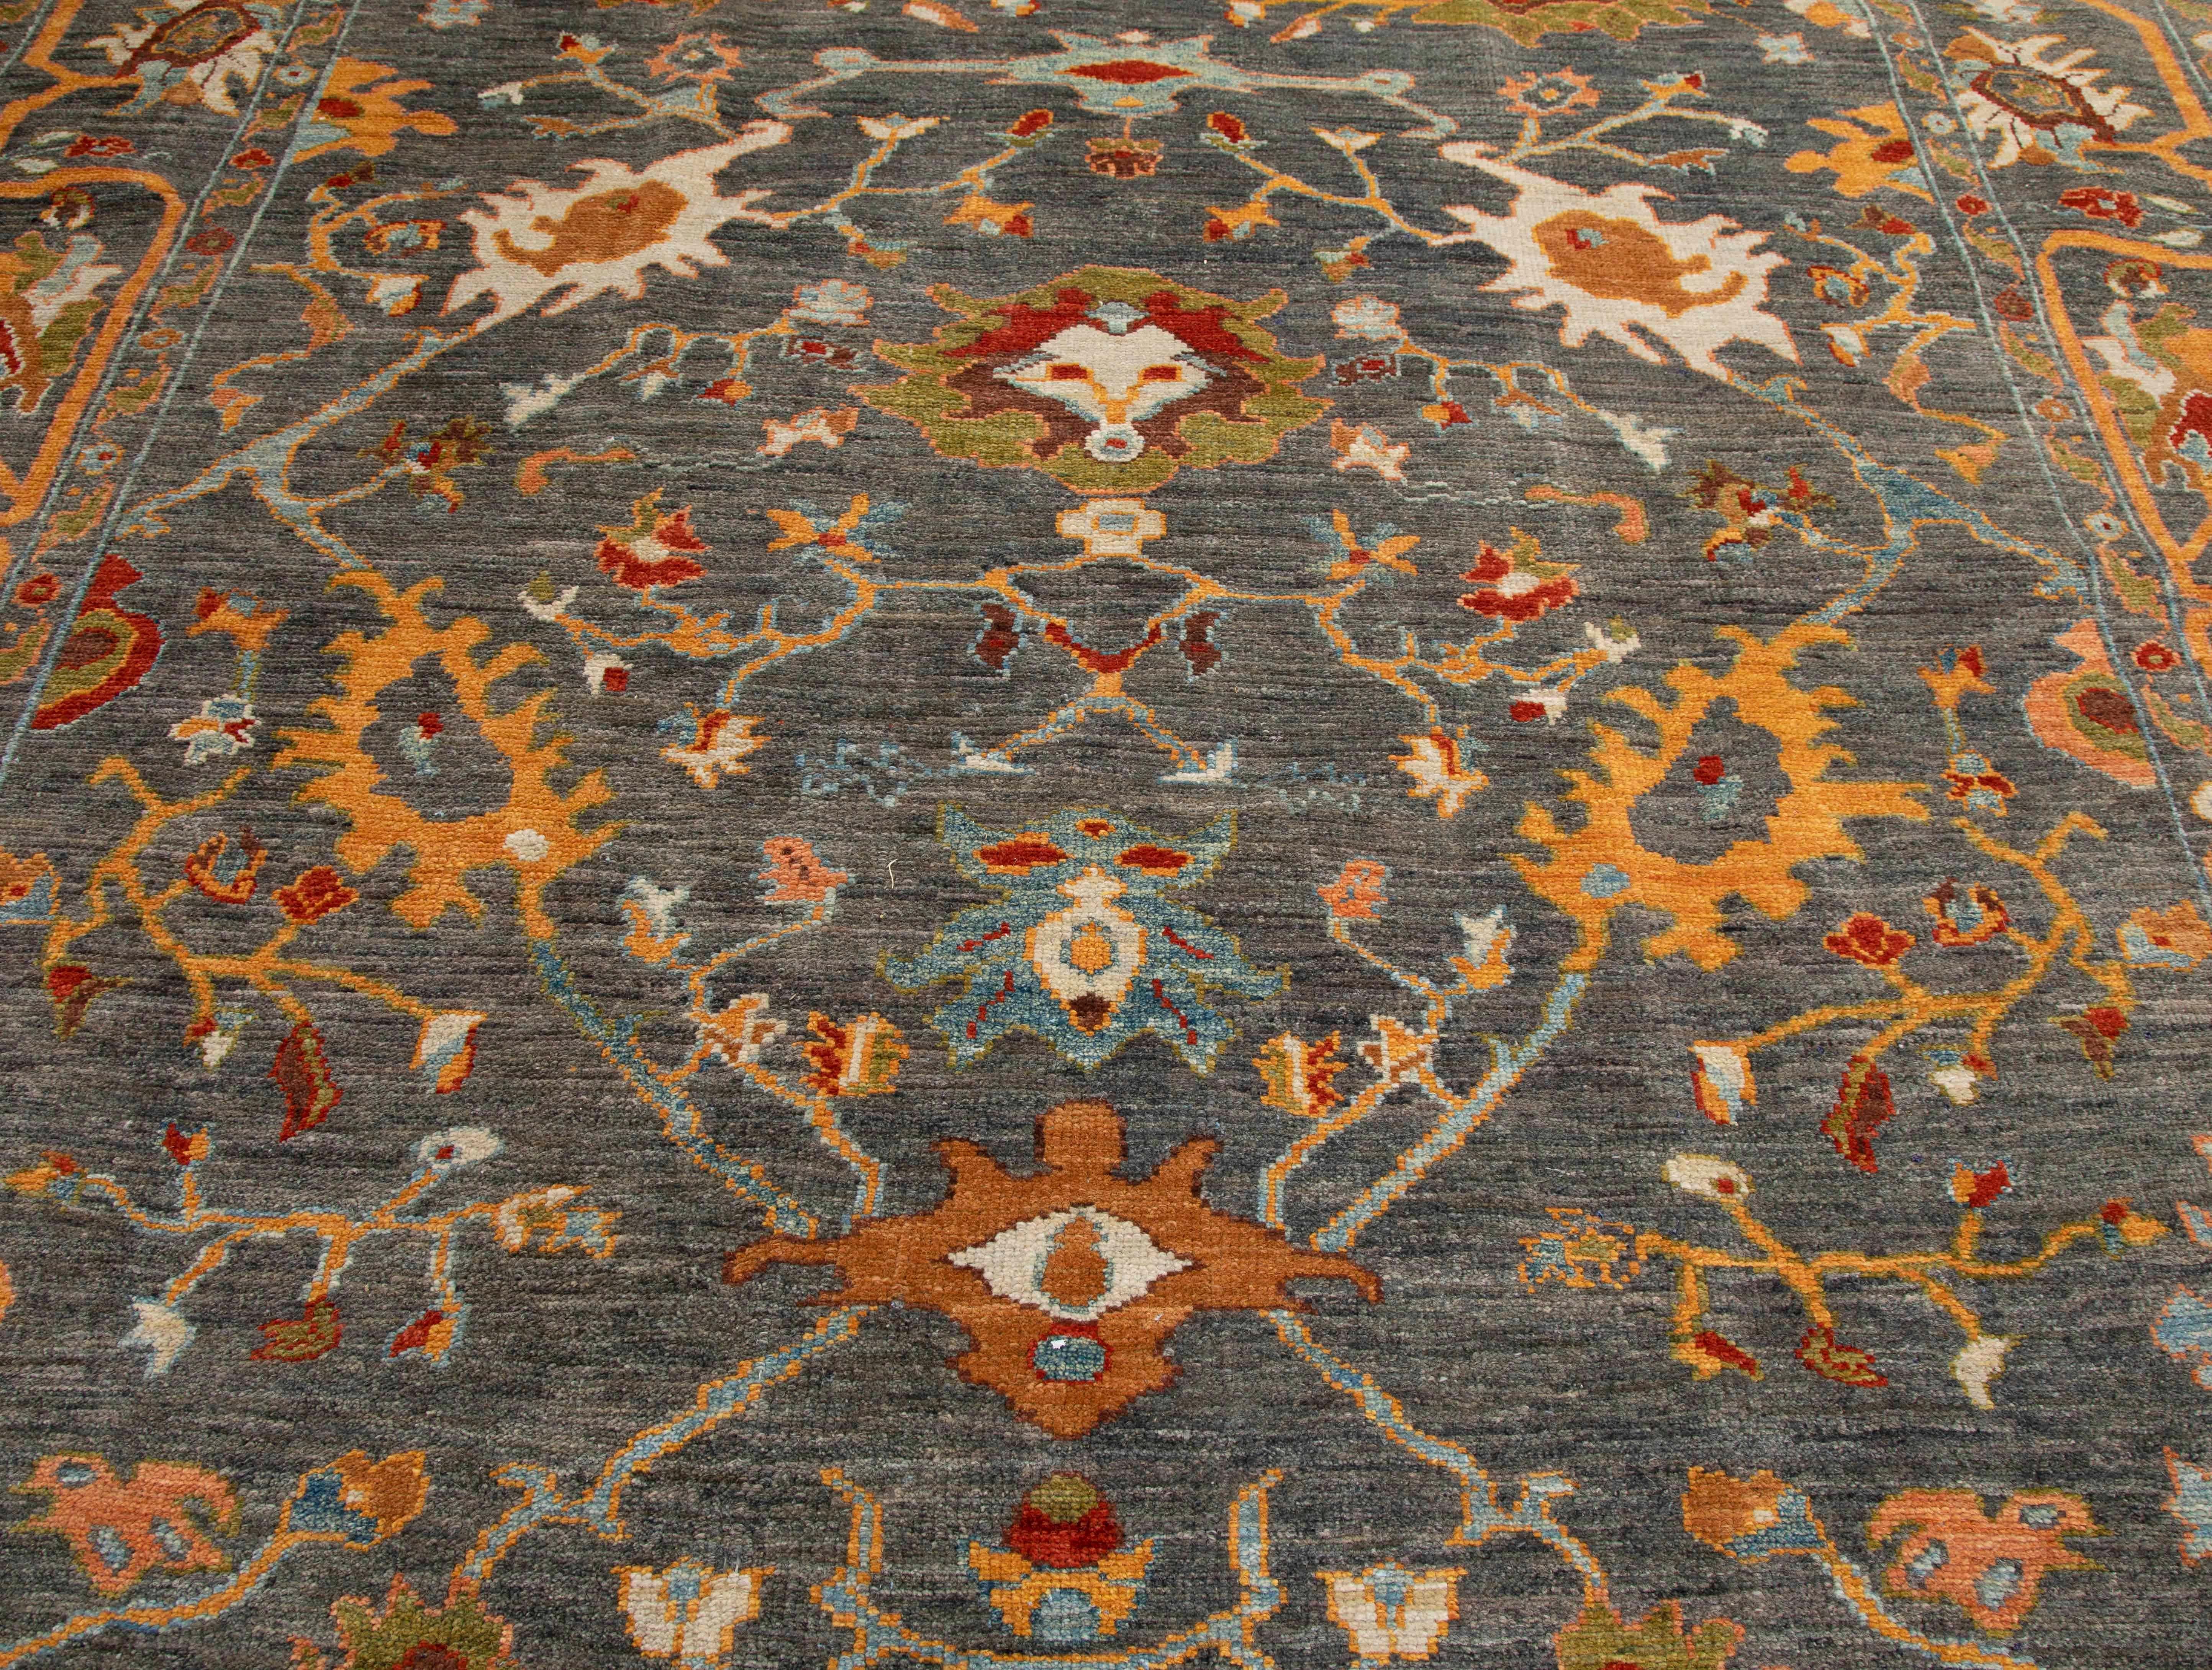 Handmade Turkish area rug from high quality sheep’s wool and colored with eco-friendly vegetable dyes that are proven safe for humans and pets alike. It’s a classic Sultanabad design featuring a regal gray field with a colored mix of Herati flower